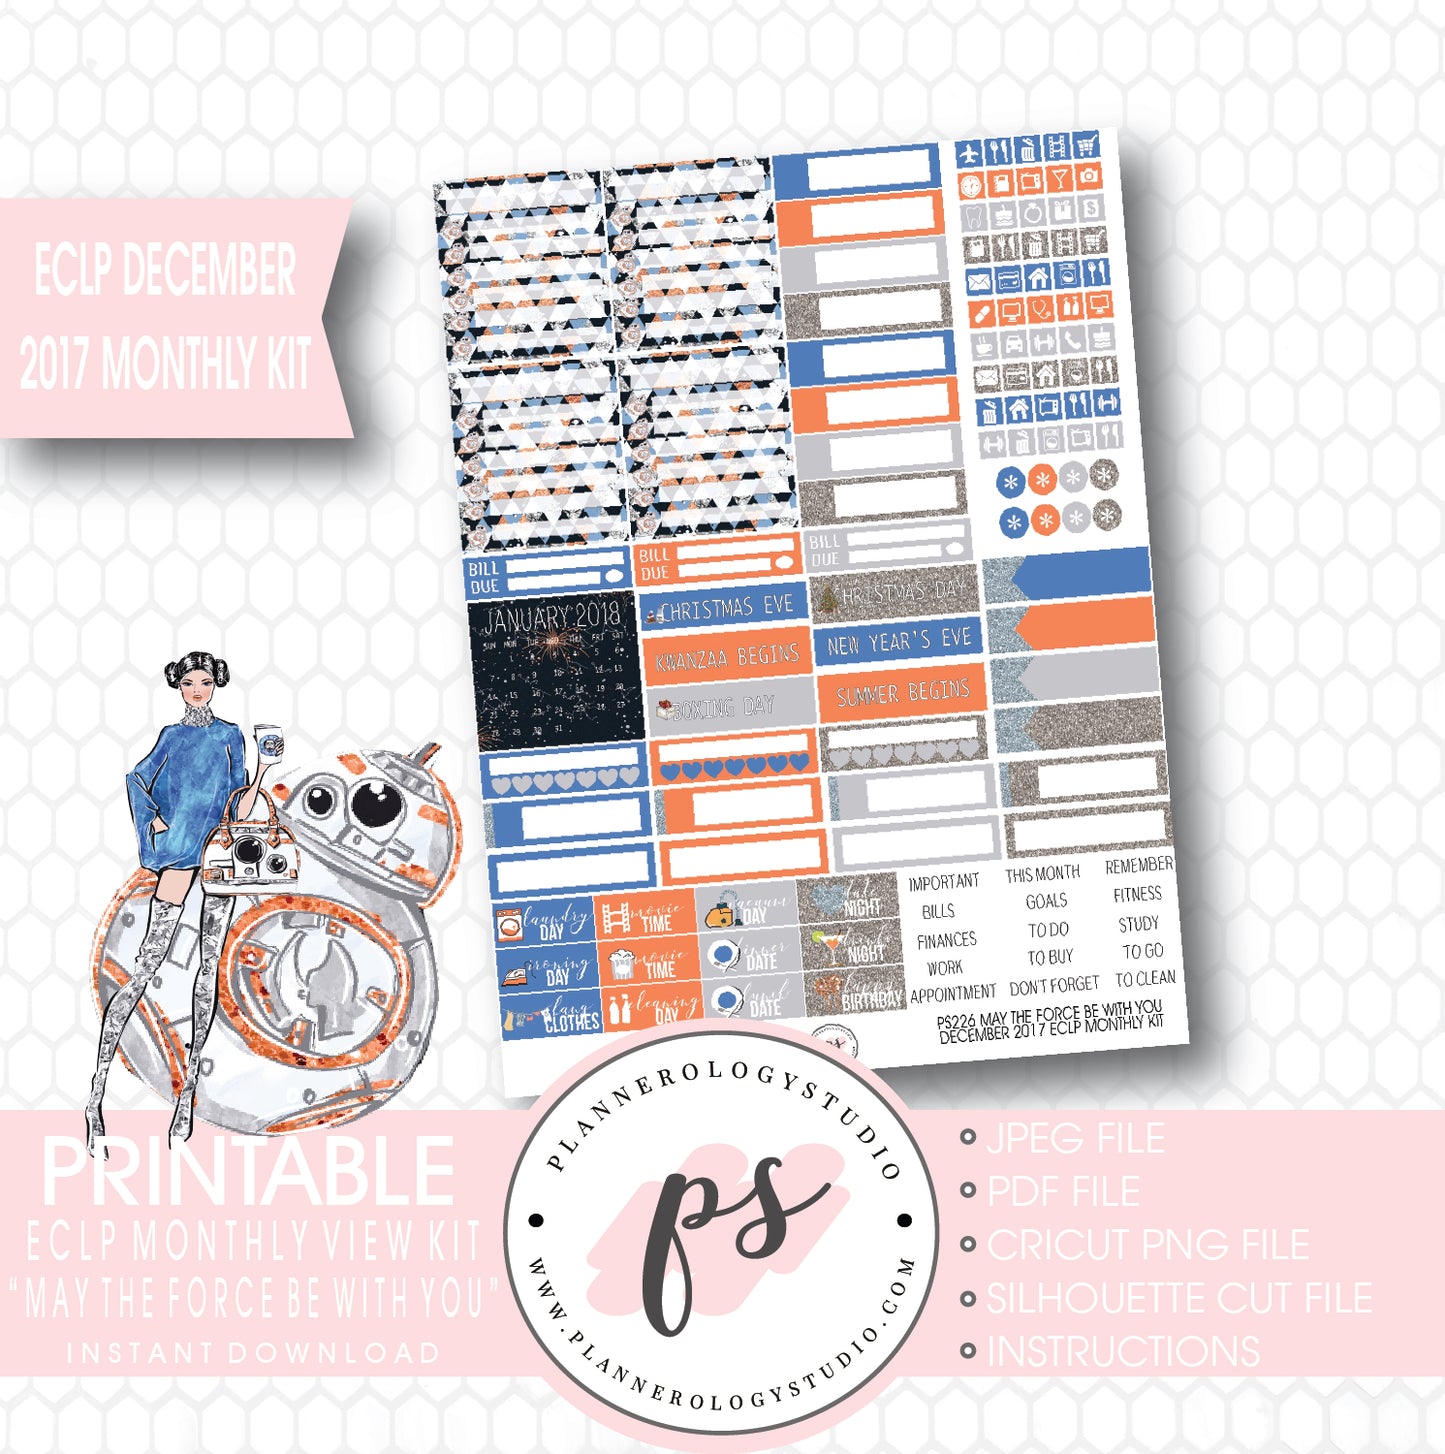 May the Force Be With You December 2017 Monthly View Kit Printable Planner Stickers (for use with ECLP) - Plannerologystudio